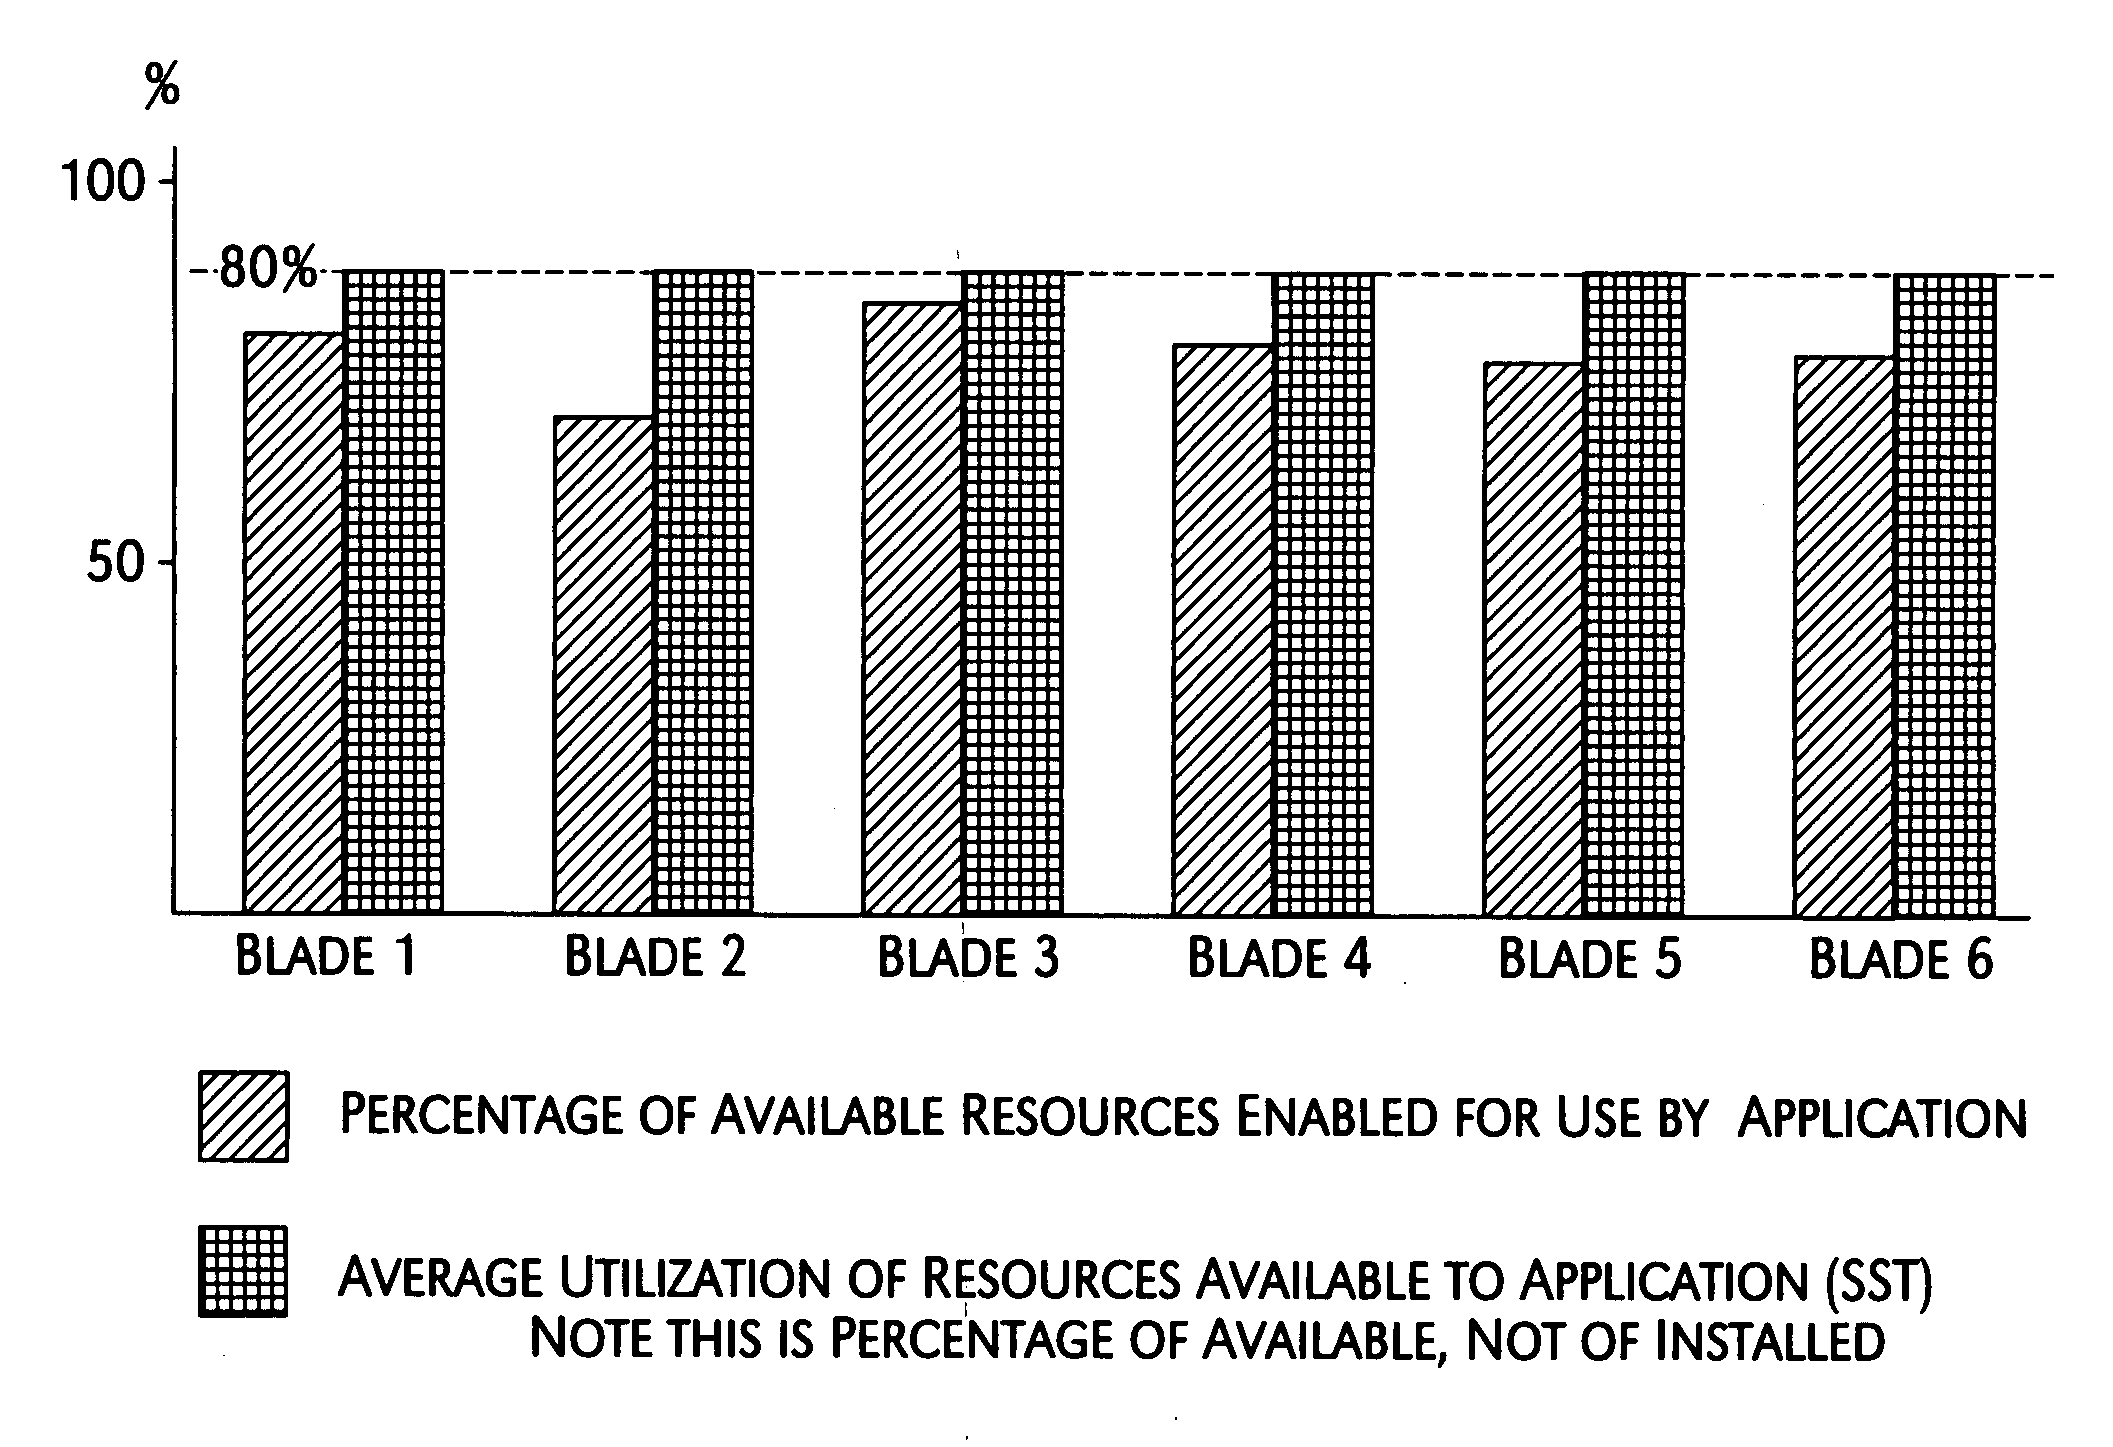 System and method for maximizing server utilization in a resource constrained environment